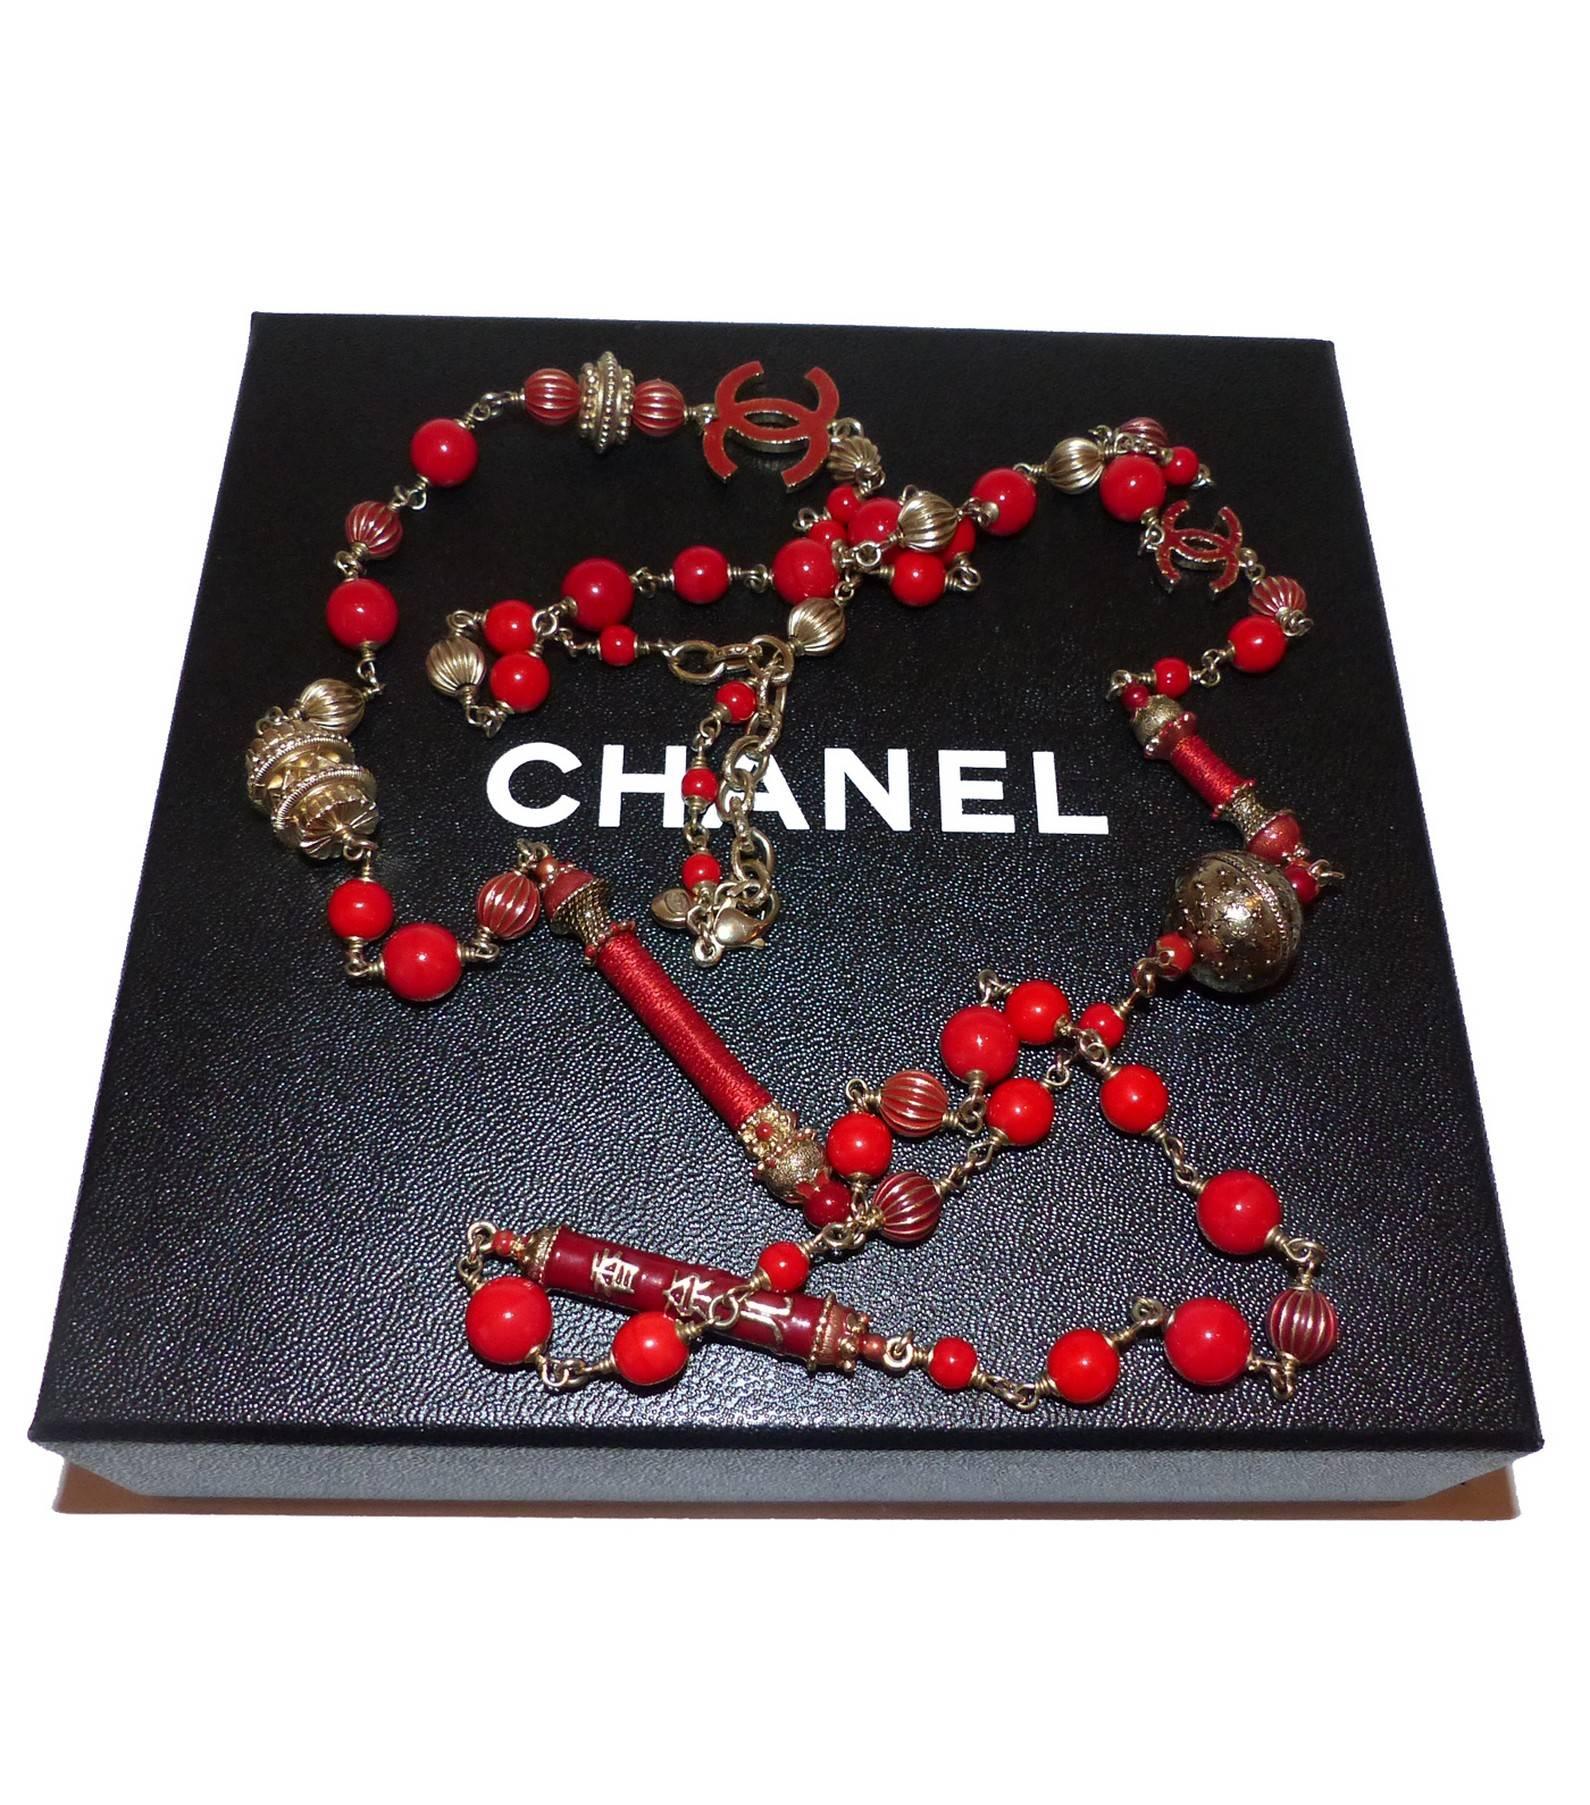 Beautiful necklace Chanel Paris Shanghai collection arts and crafts collection
Red glass beads and gold brushed metal
Chinese charms and double chanel symbol C
Lobster clasp closure
Chanel signature plaque
Excellente Condition 
Its comes with Chanel